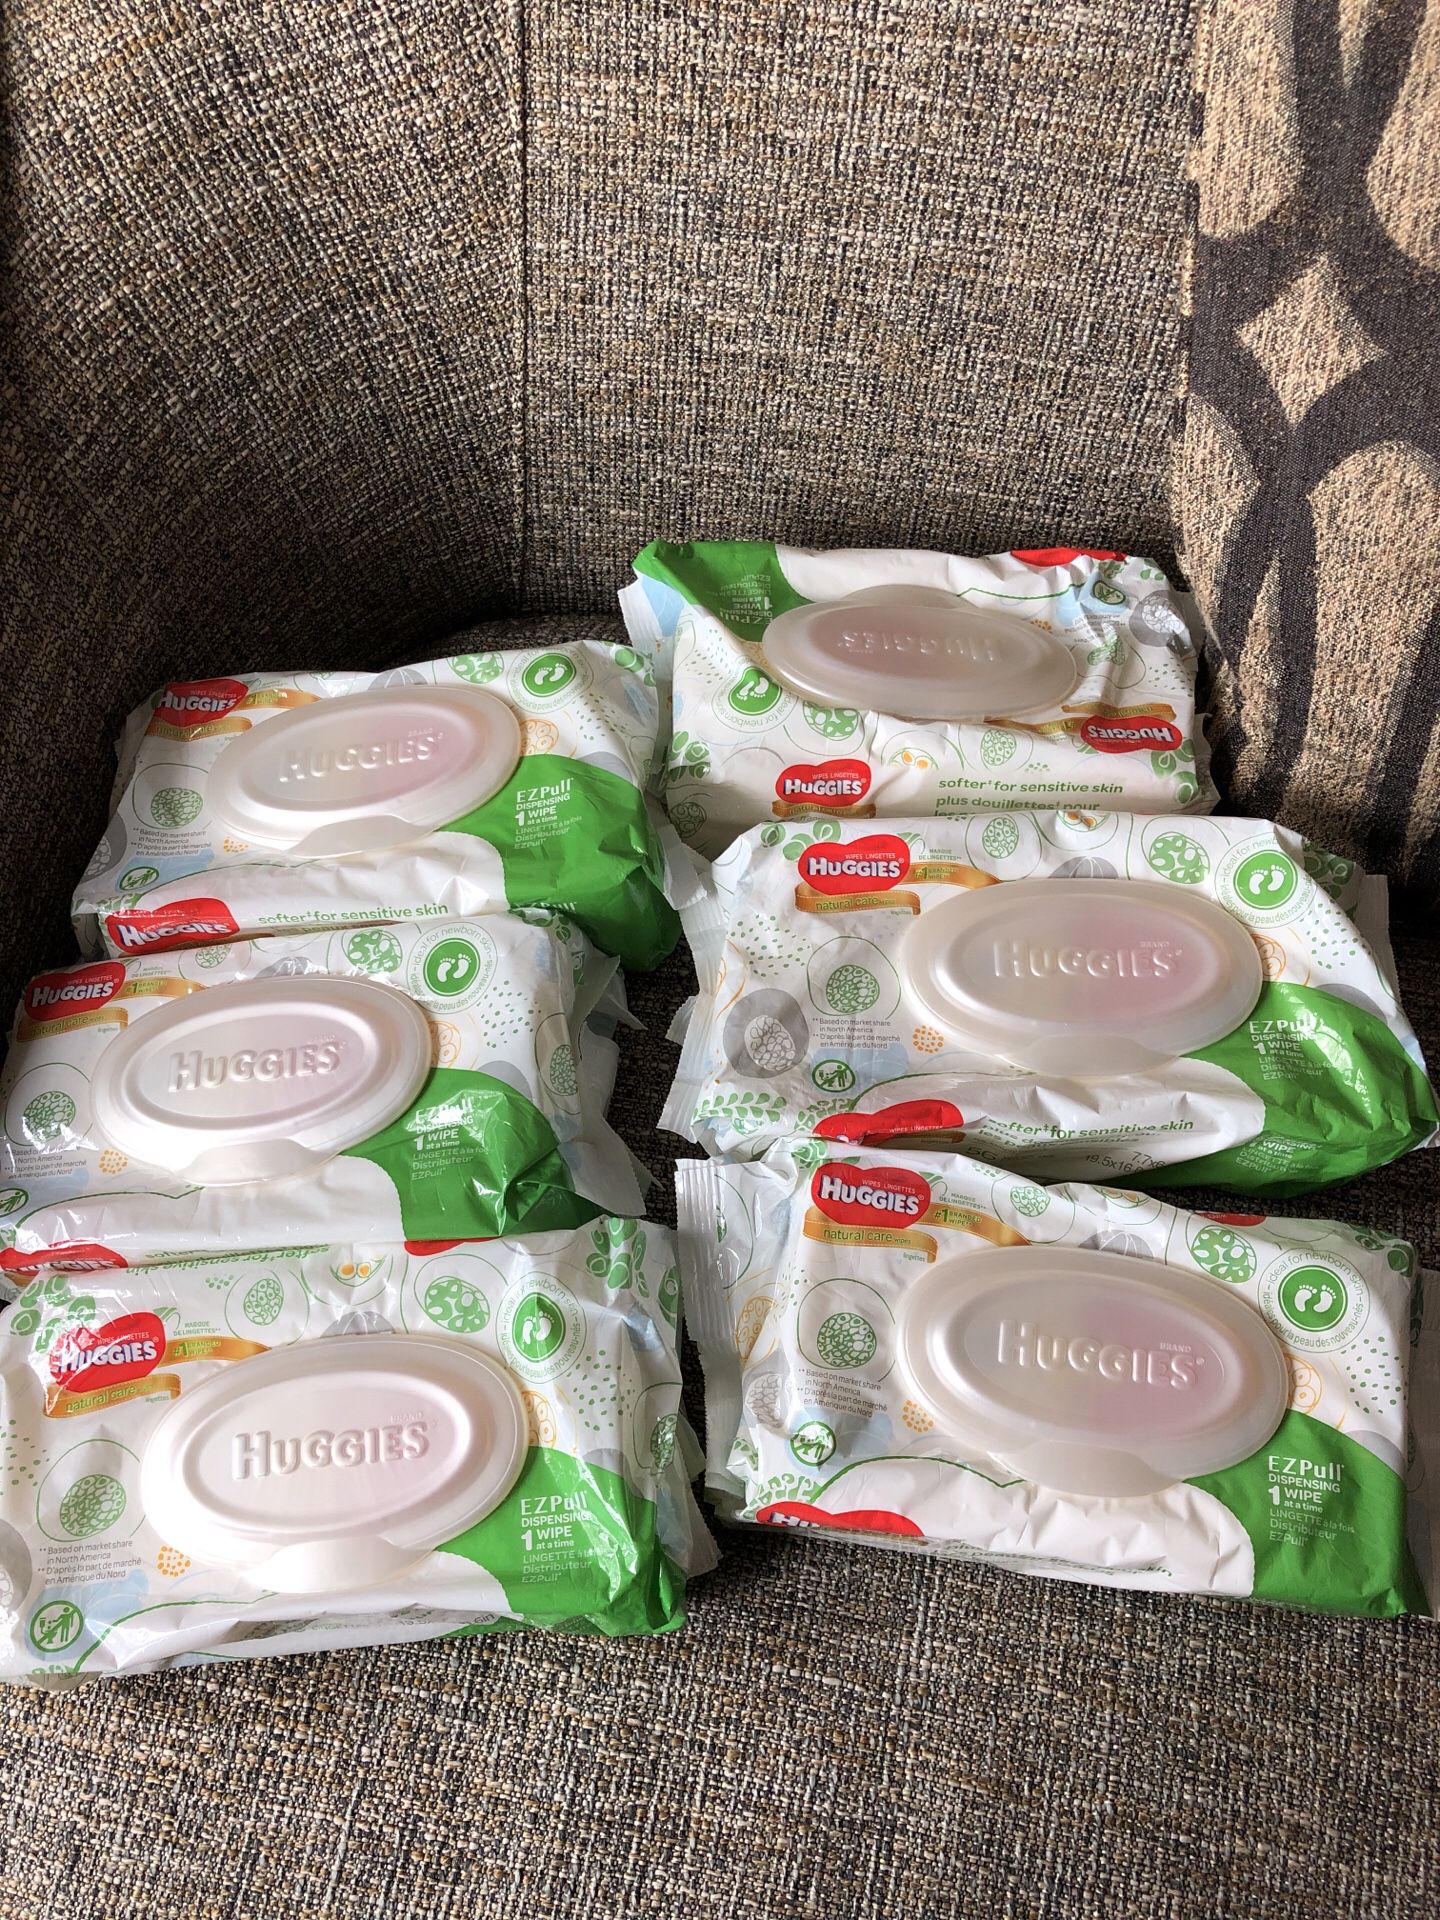 6 Packs of Huggies Baby Wipes . Please see all the pictures and read the description